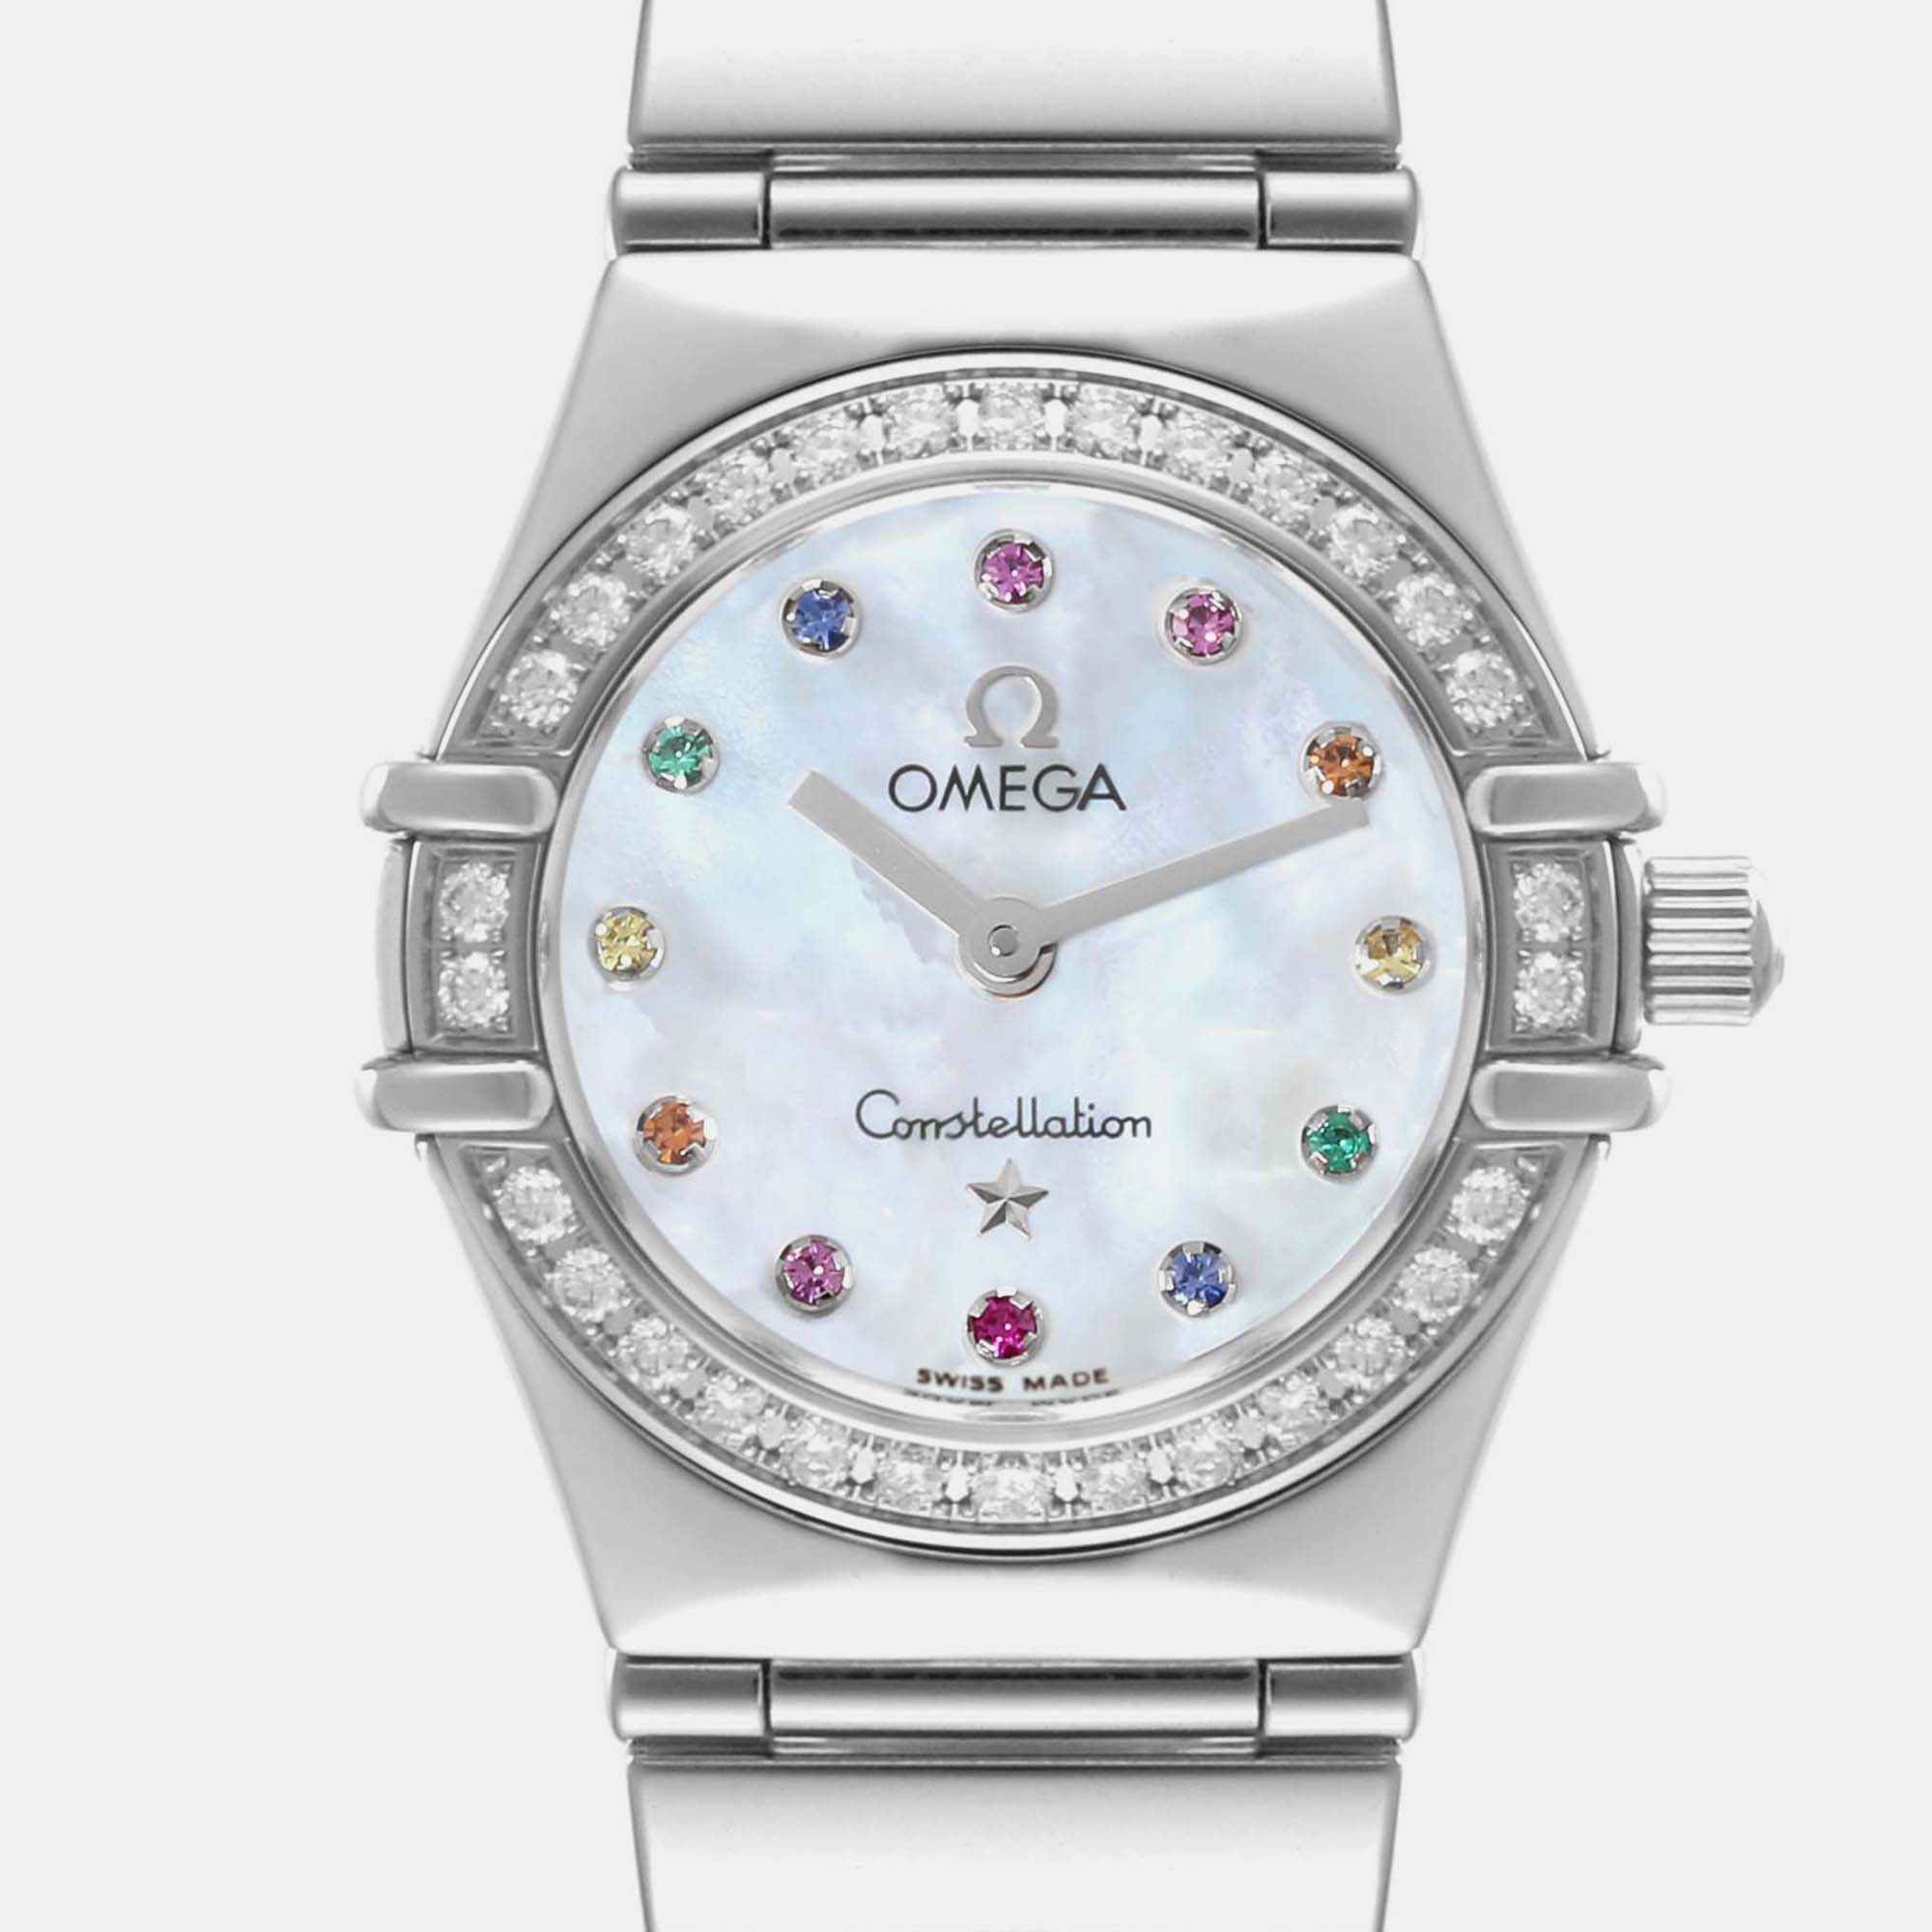 Omega Mother Of Pearl Diamond Stainless Steel Constellation 1465.79.00 Quartz Women's Wristwatch 22.5 Mm